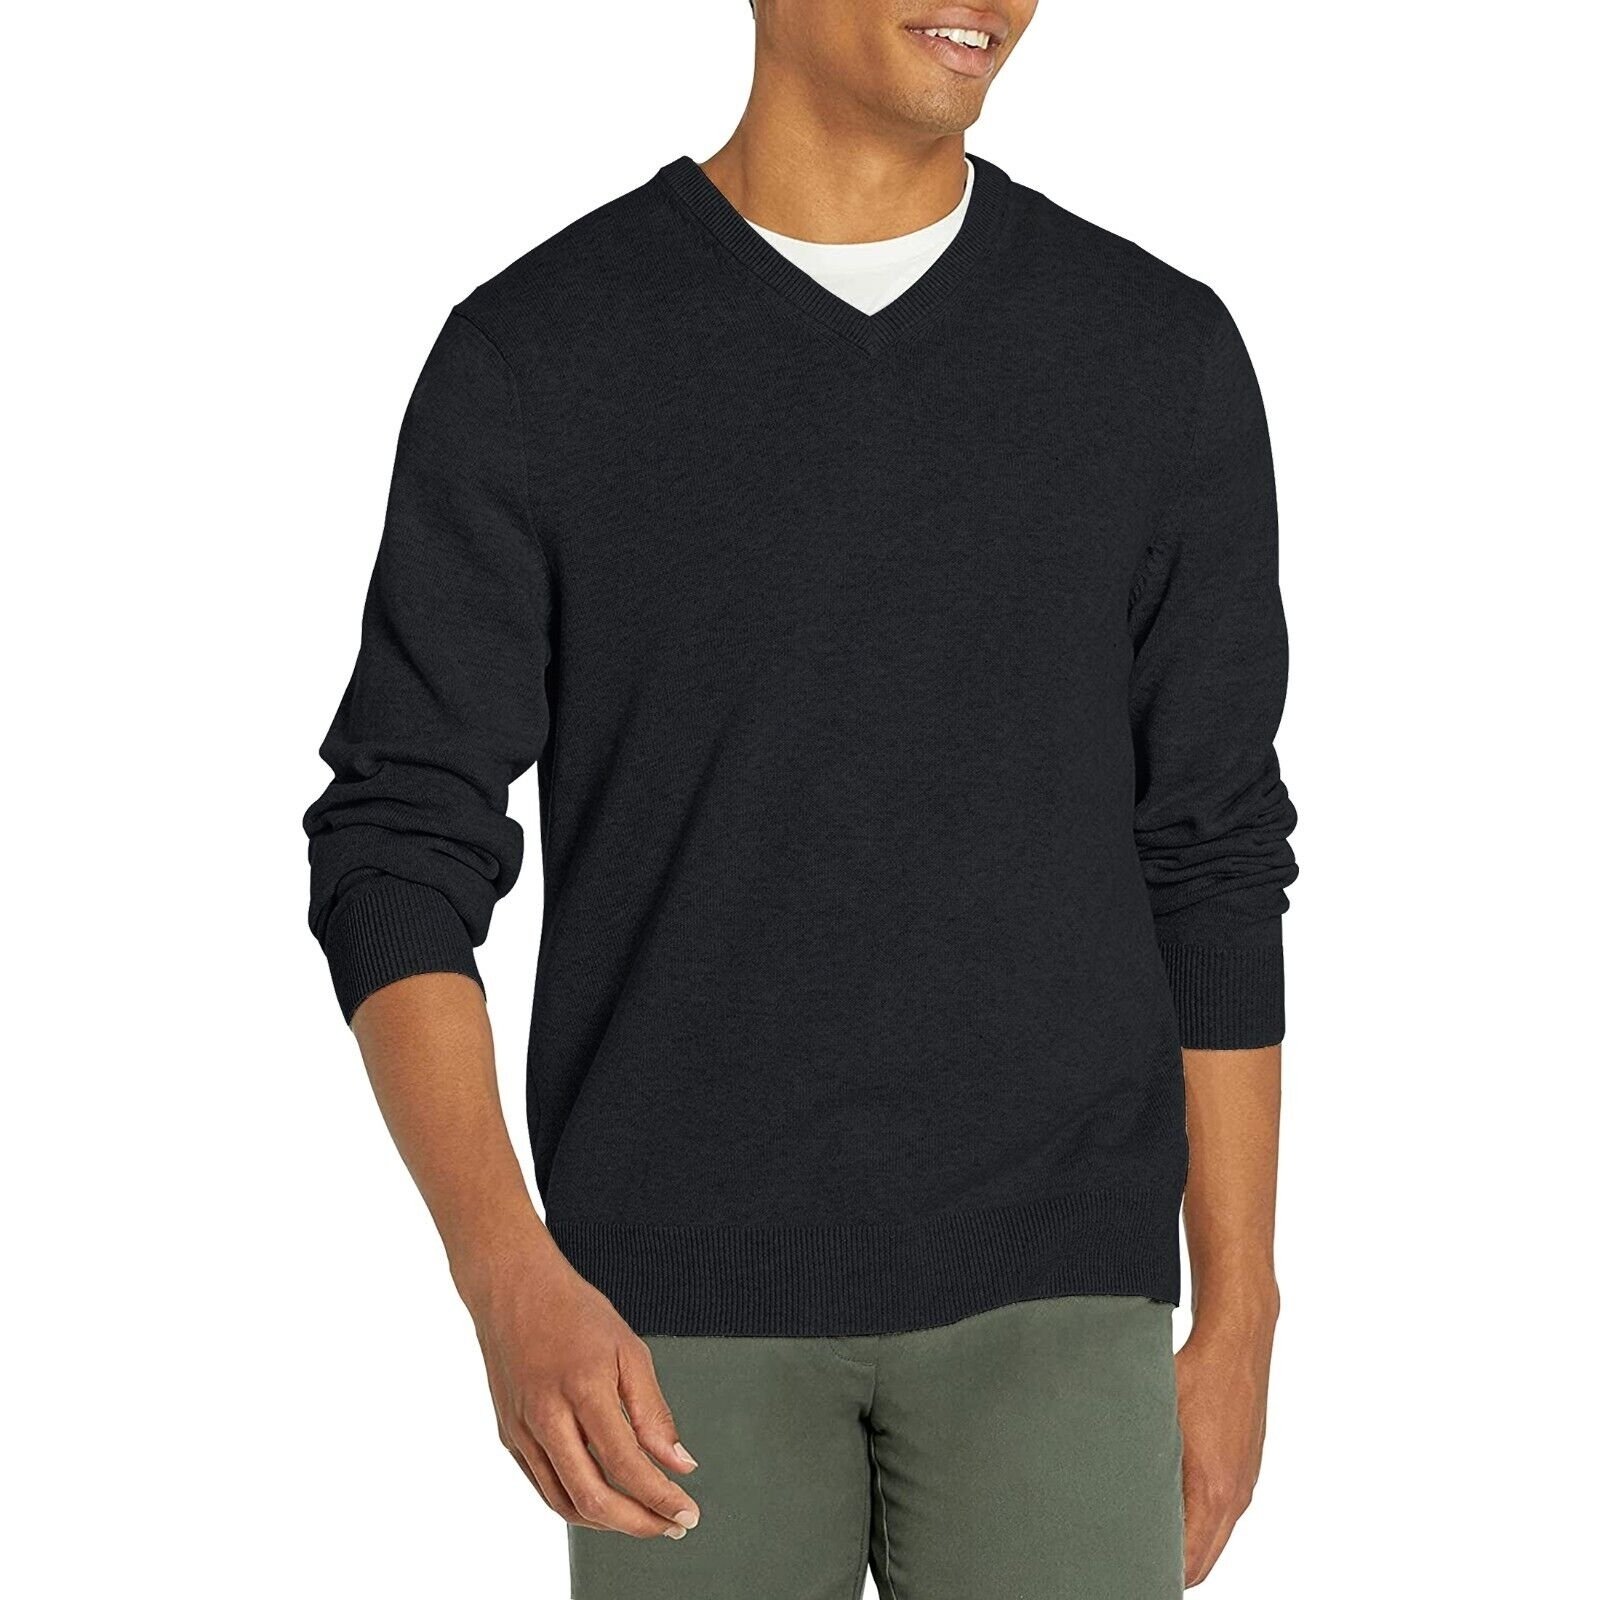 Men's Casual Ultra-Soft Slim Fit Warm Knit Pullover V-Neck Sweater For Winter - Black, X-Large